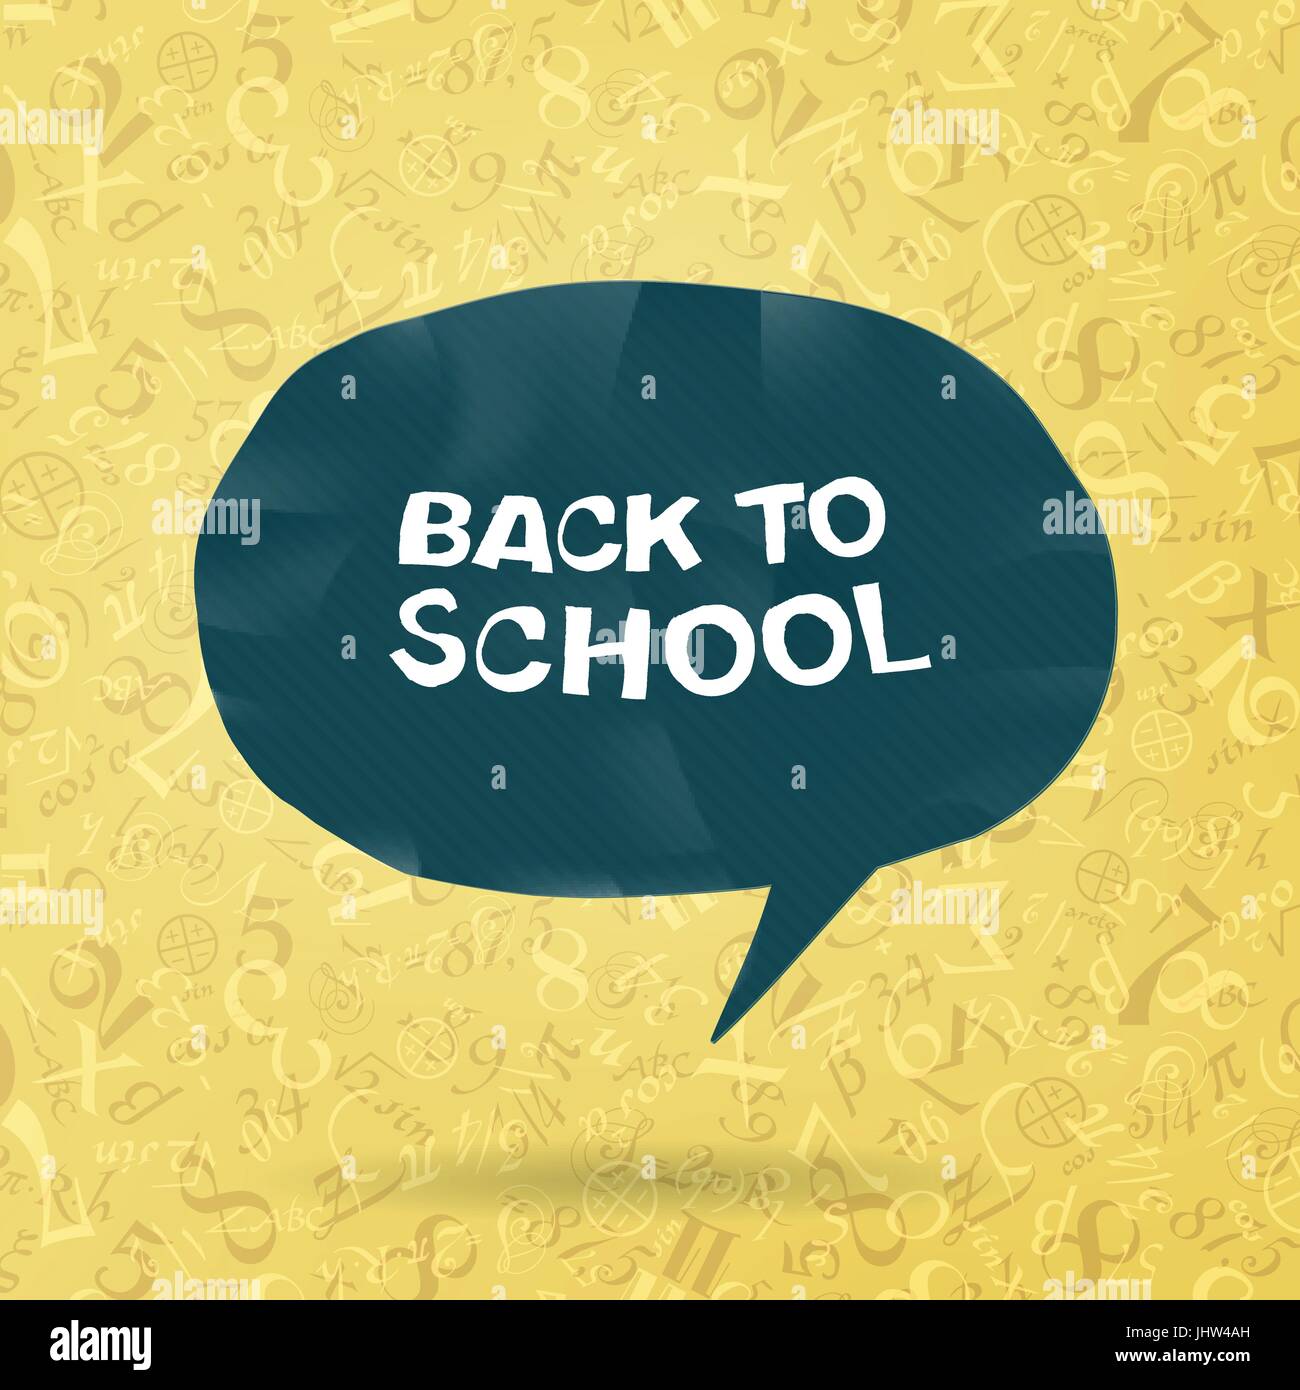 Back to school text in speech bubble on figures and formulas background. Vector illustration, EPS10 Stock Vector